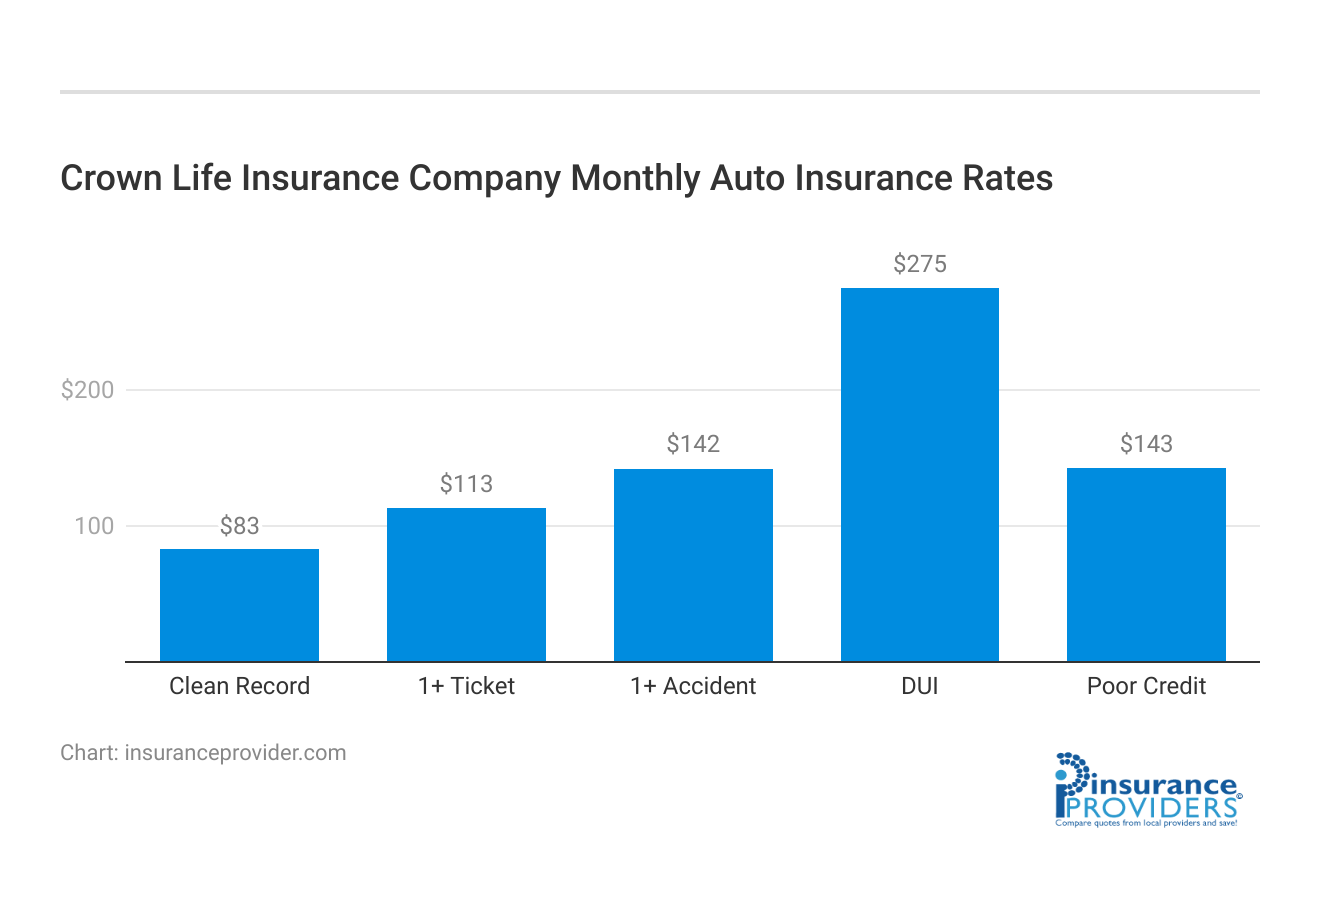 <h3>Crown Life Insurance Company Monthly Auto Insurance Rates</h3>